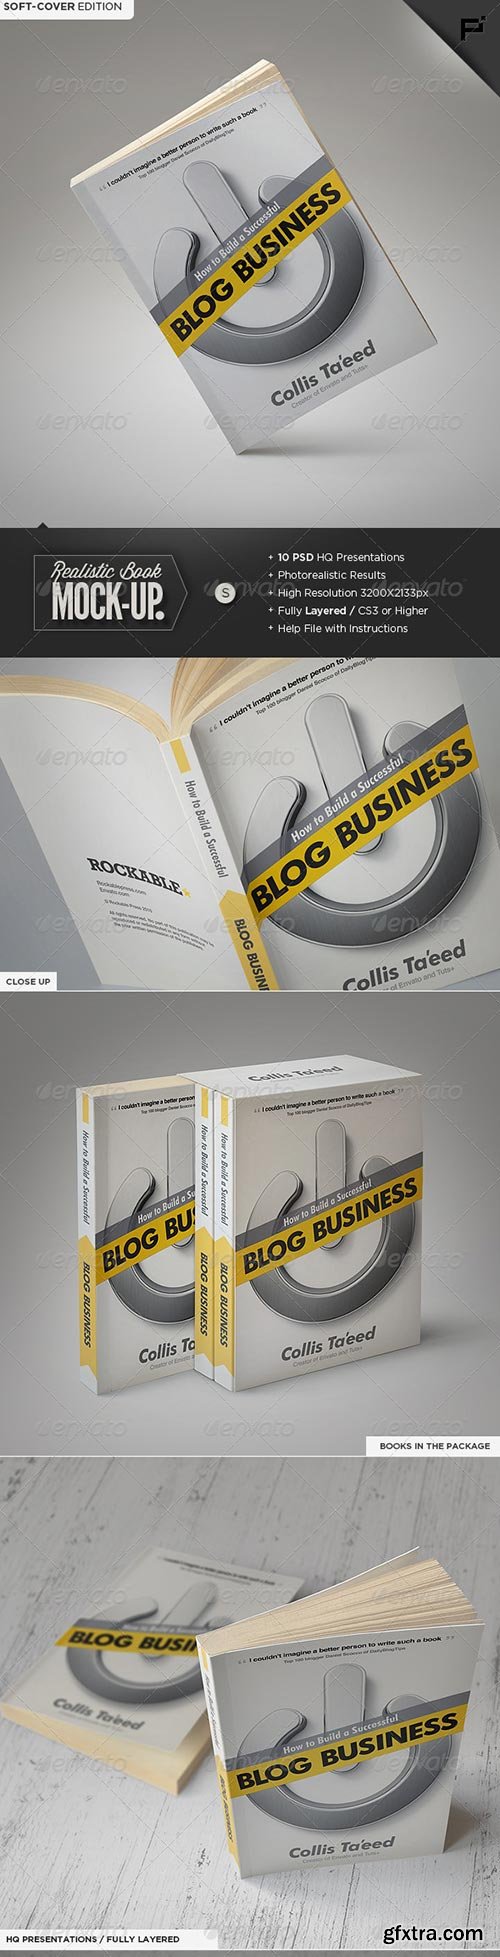 GraphicRiver - Book Mock-Up / Soft-Cover Edition 6347935